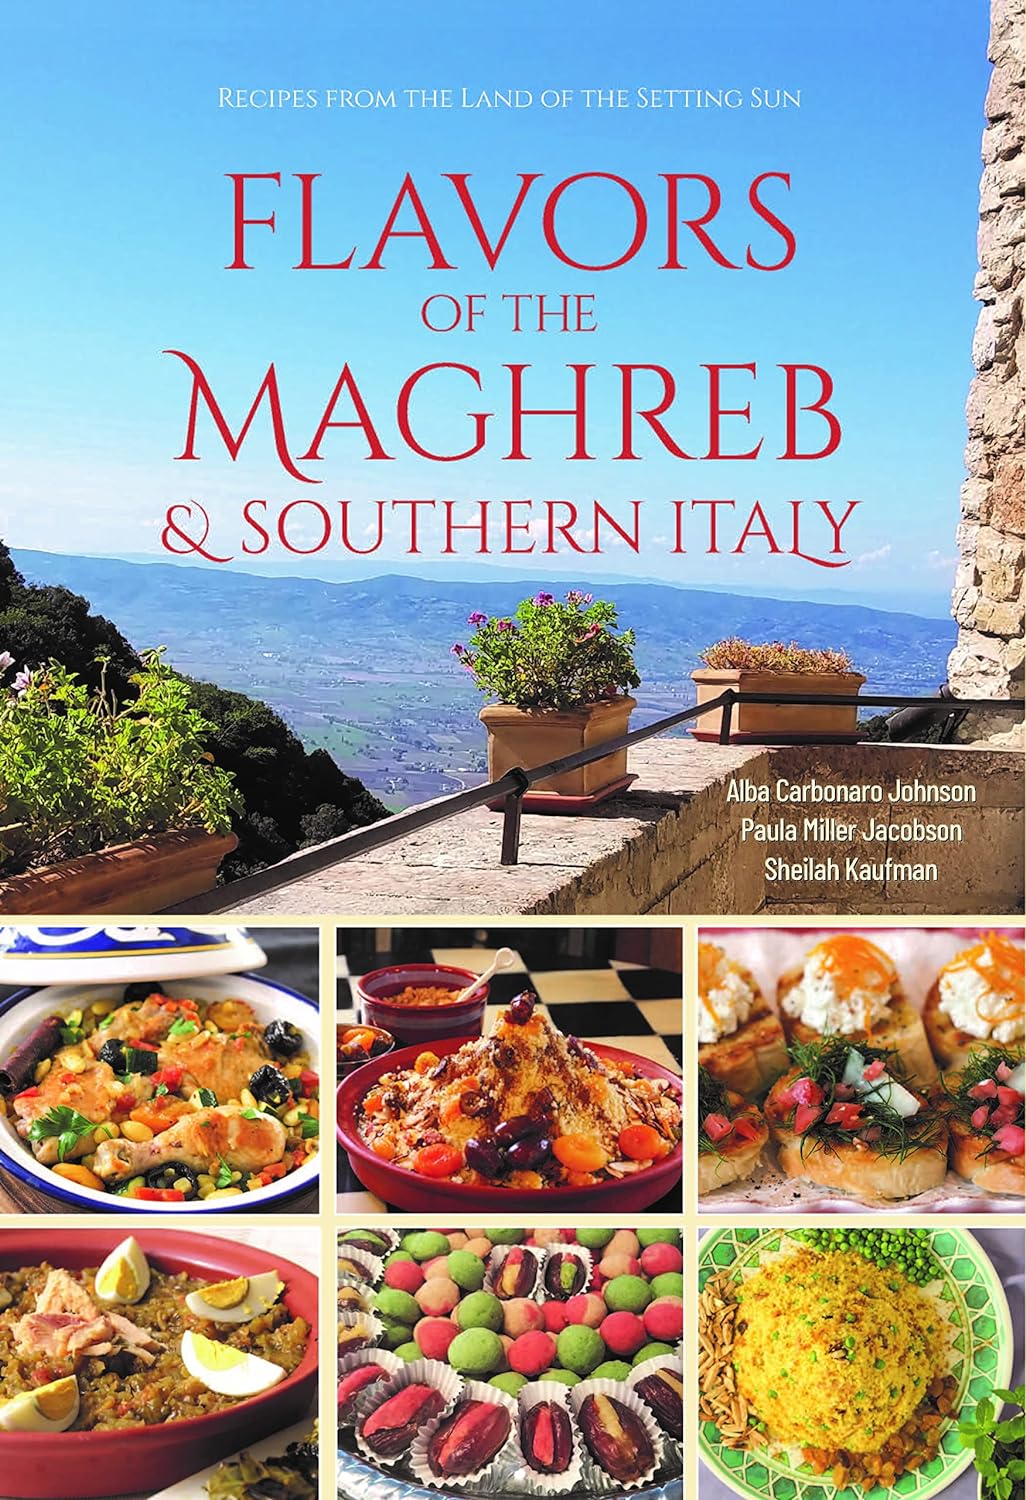 Flavors of the Maghreb & Southern Italy: Recipes from the Land of the Setting Sun (Alba Carbonaro Johnson, Paula Miller Jacobson, Sheilah Kaufman)